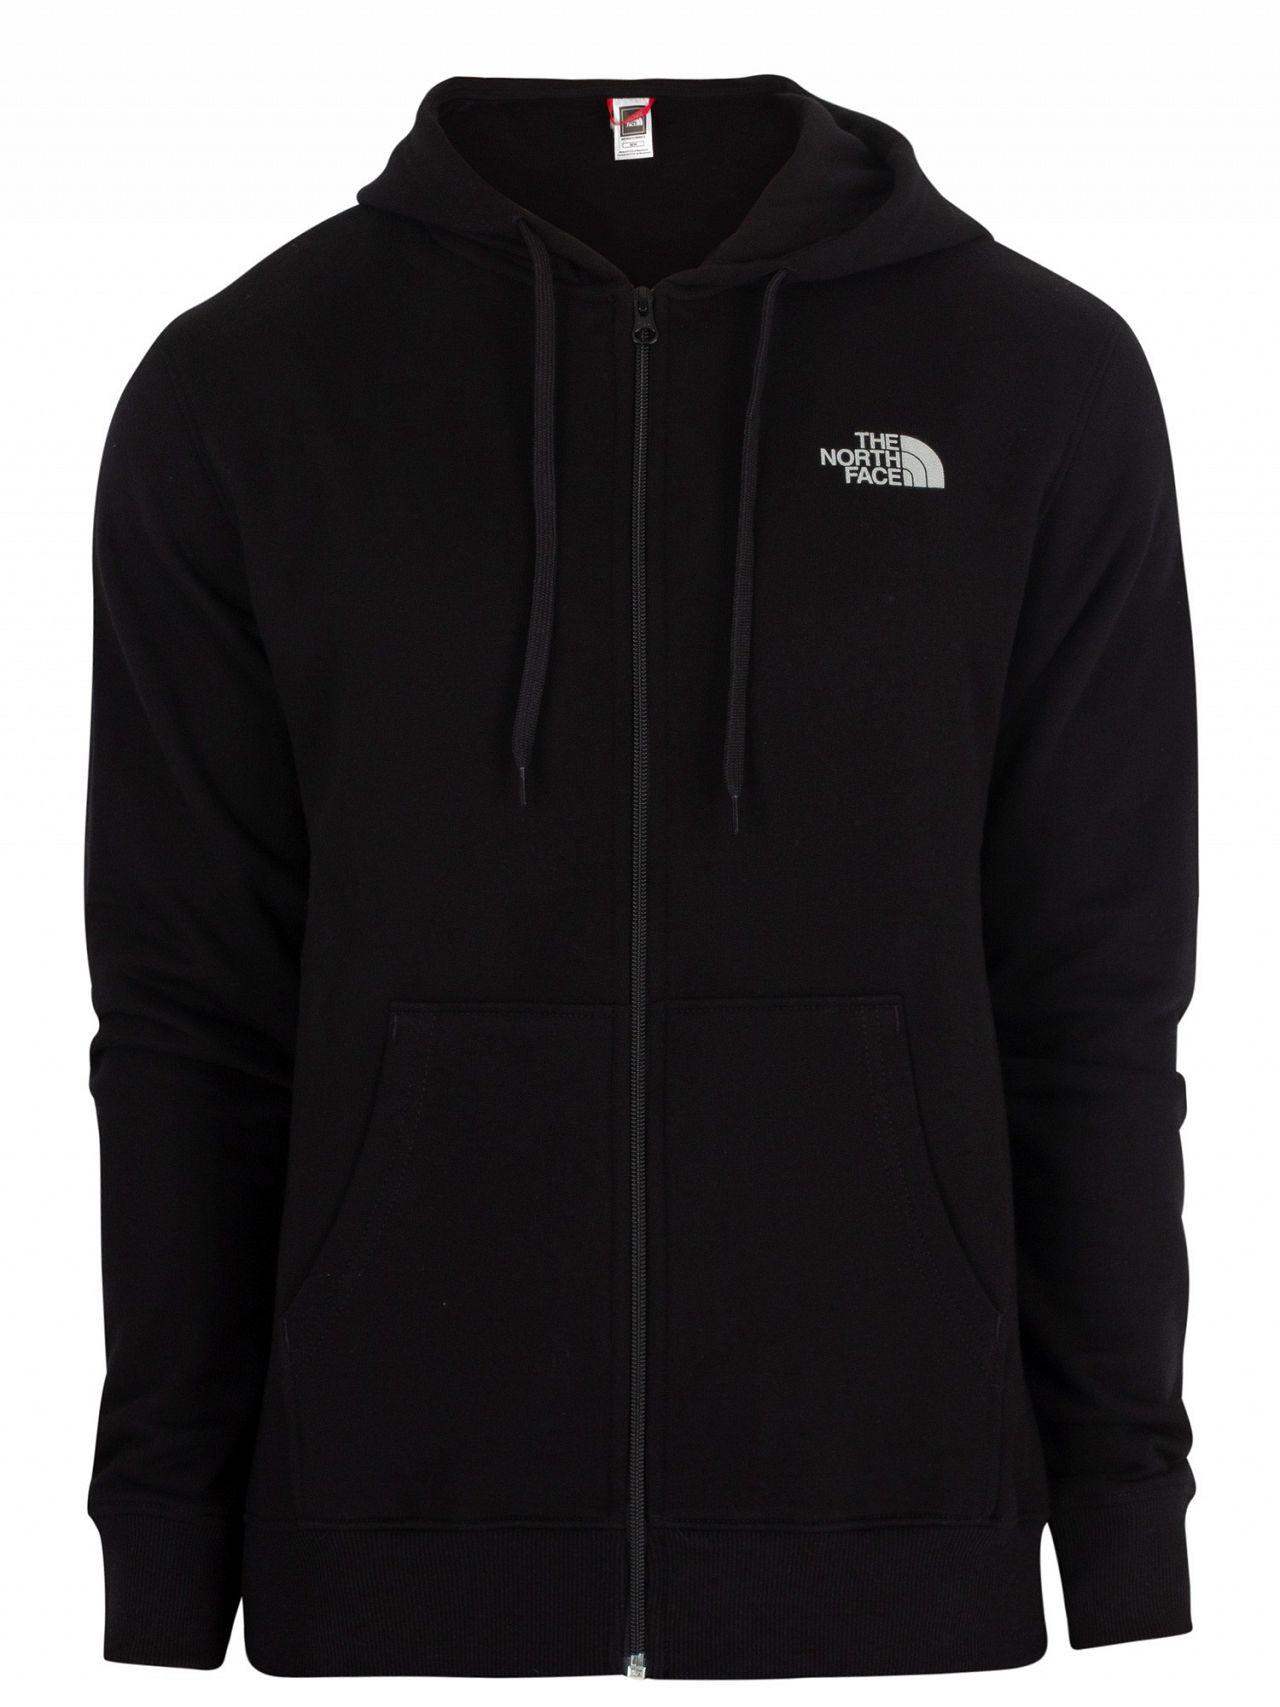 The North Face Cotton Open Gate Full Zip Hoodie in Black for Men - Lyst